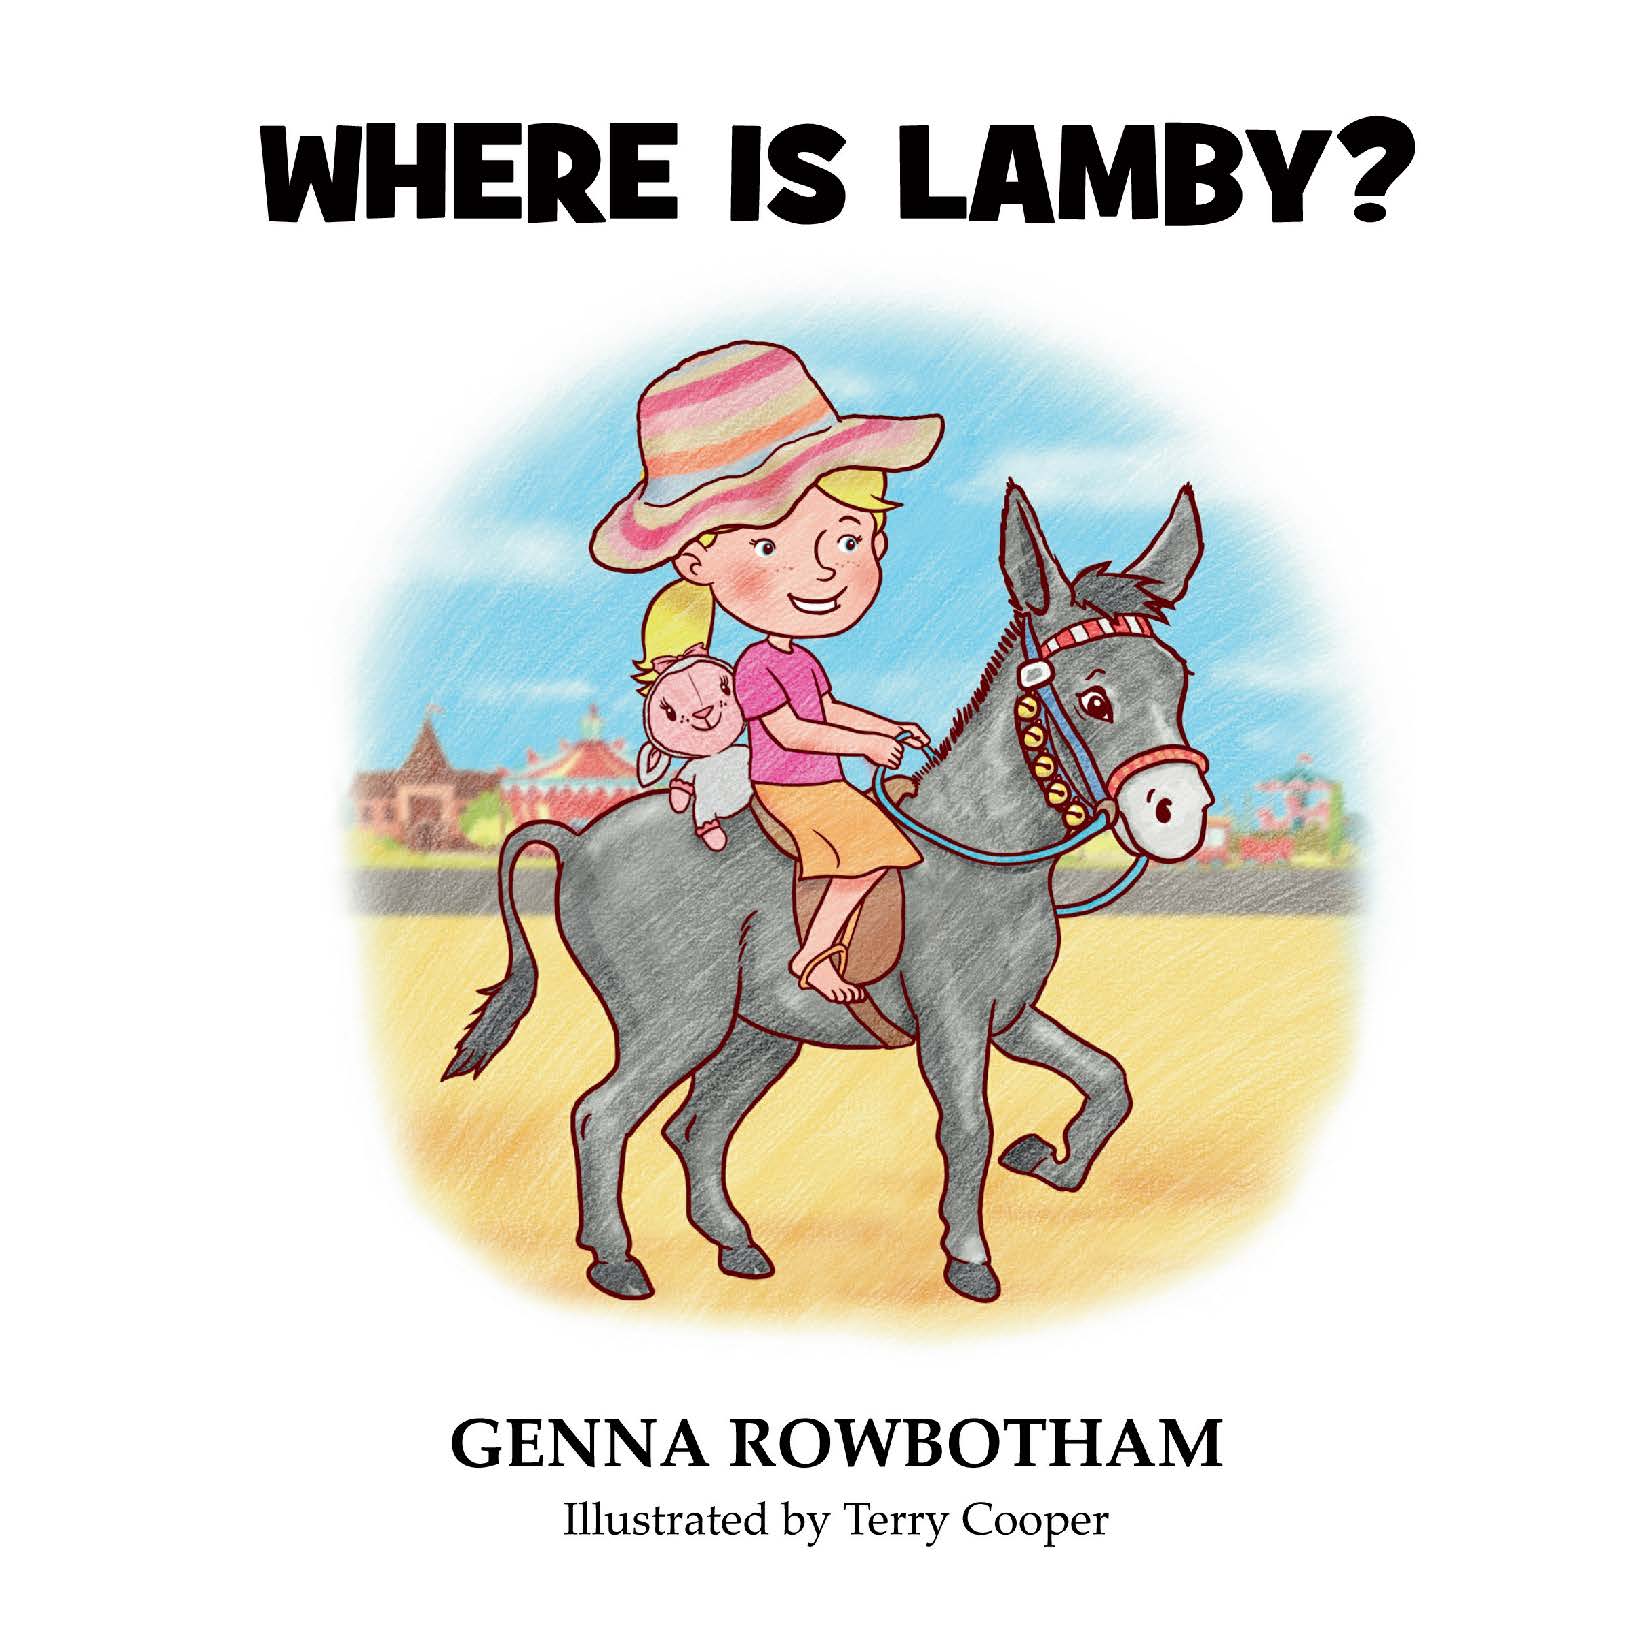 Where is Lamby?